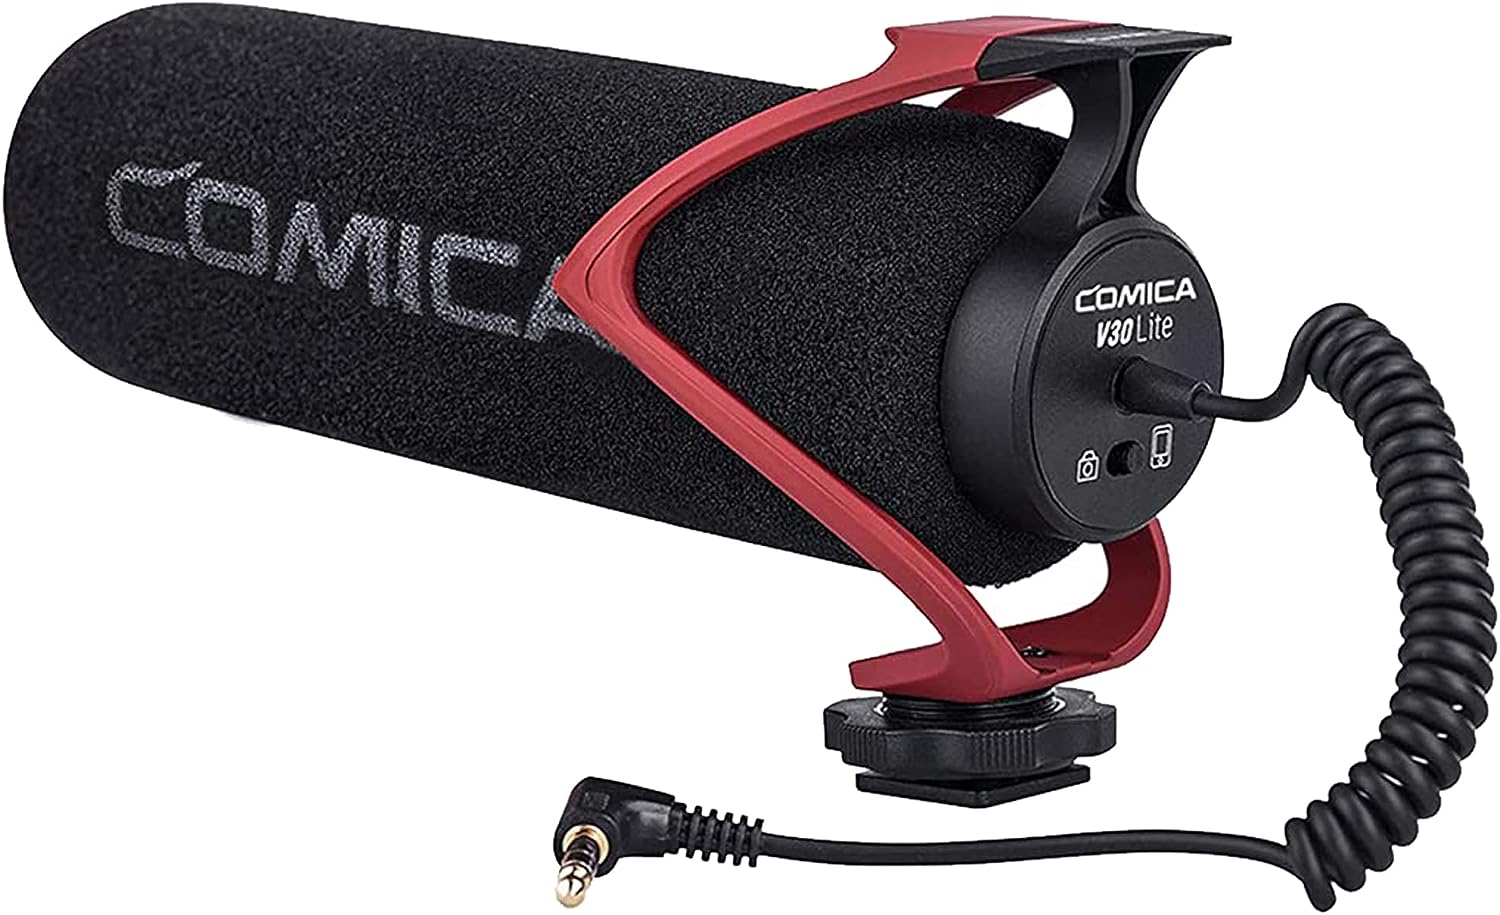 Choosing the Right Microphone for Your DSLR: A Buyer’s Guide